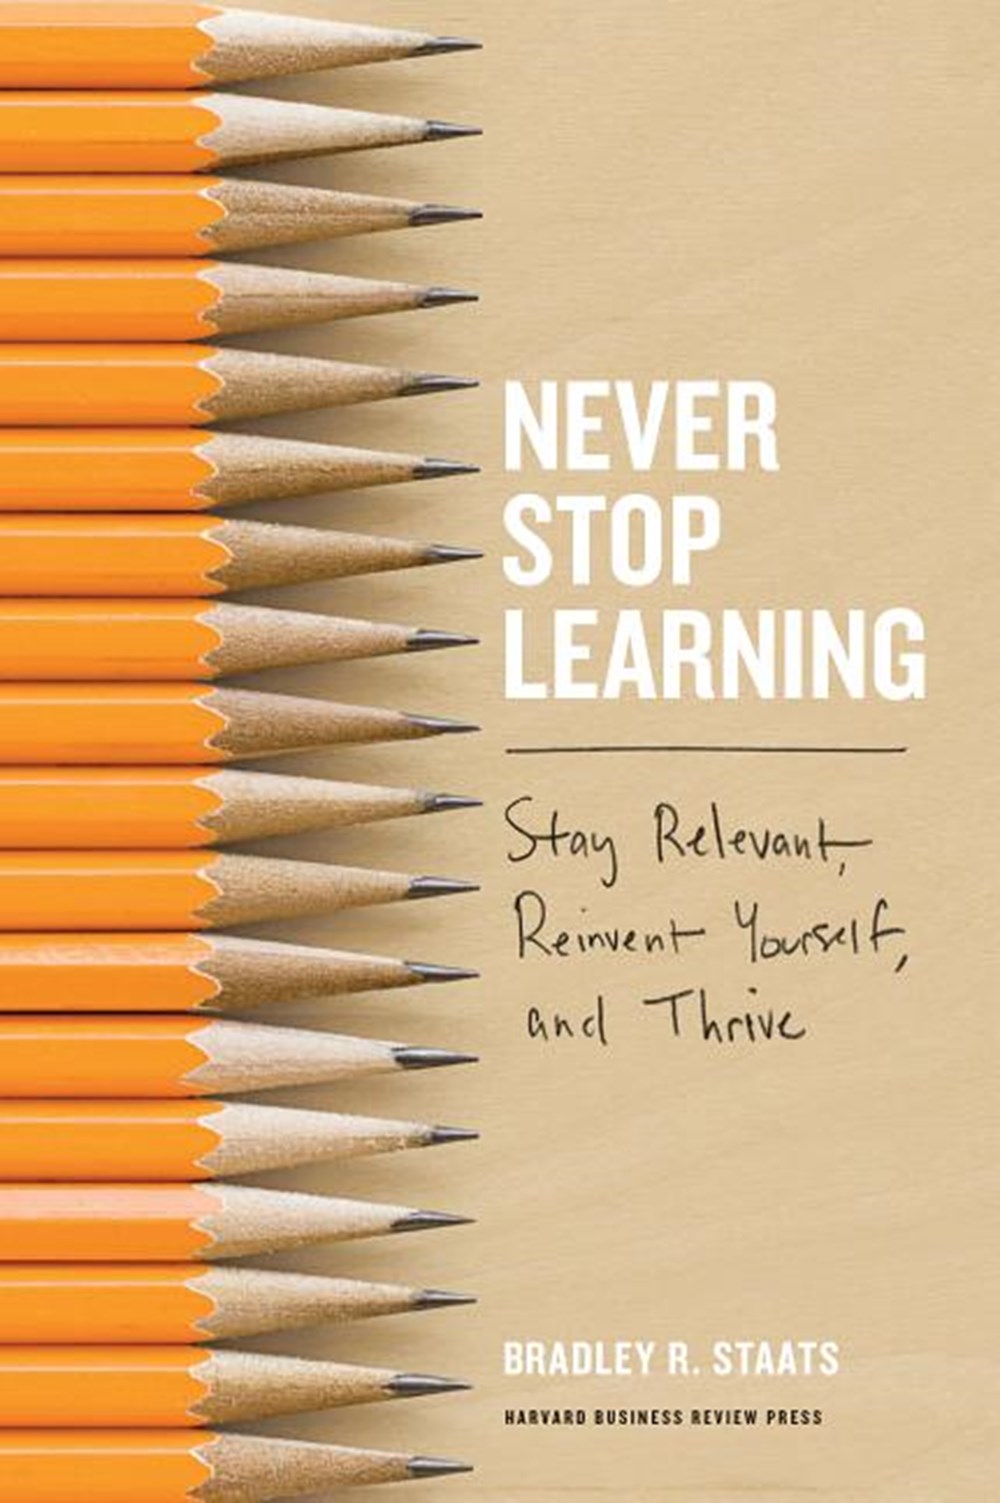 Never Stop Learning Stay Relevant, Reinvent Yourself, and Thrive